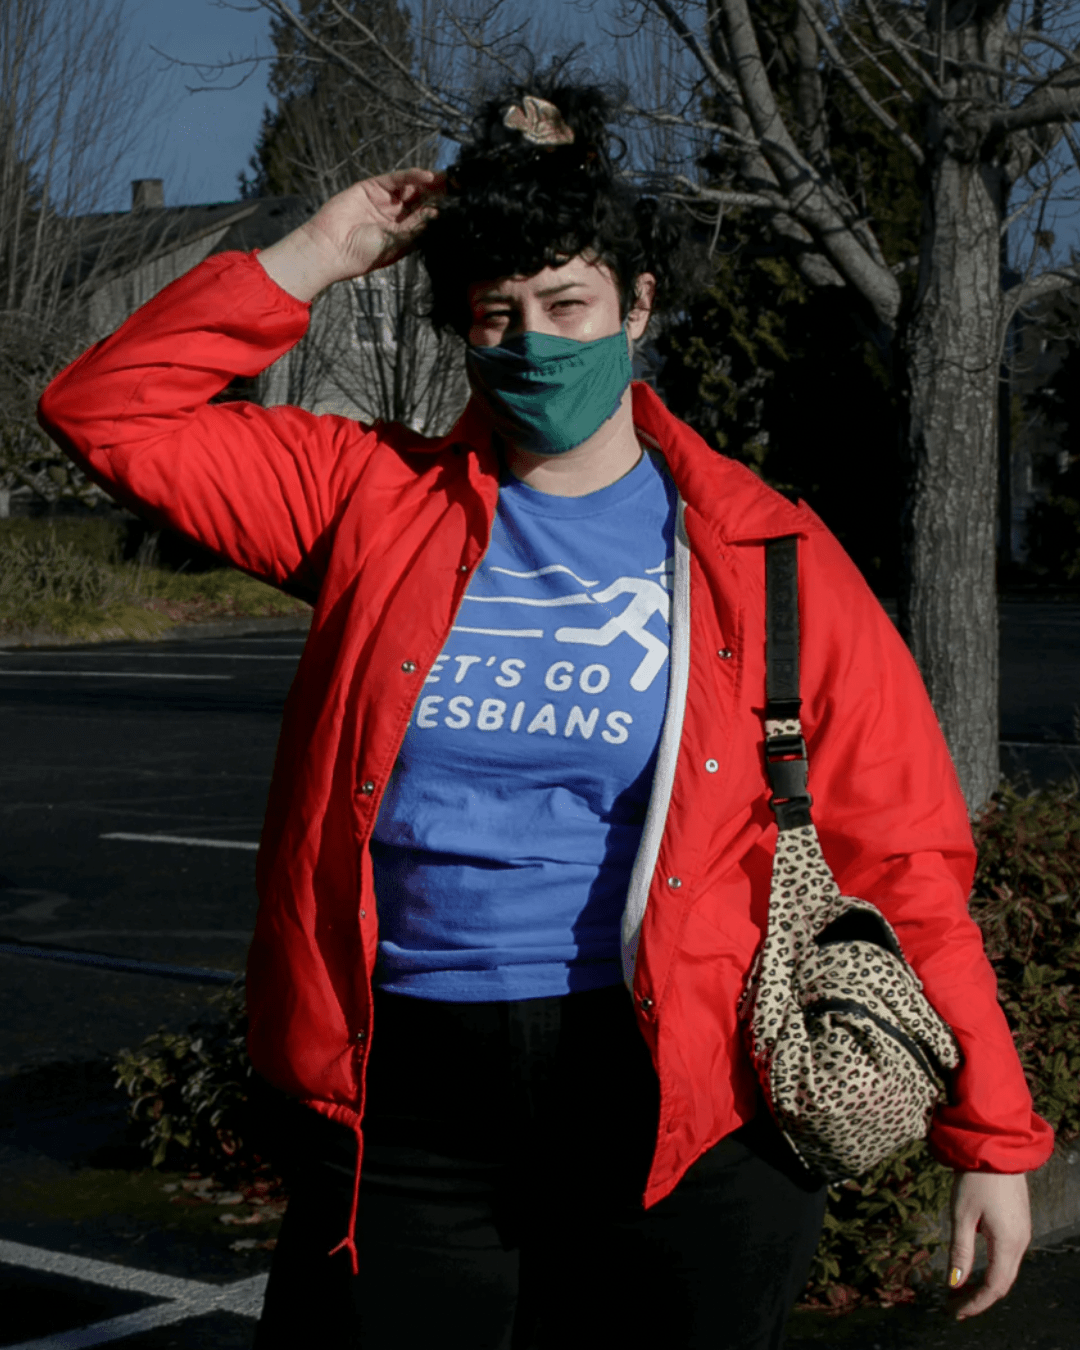 Model Nitro is wearing the Let’s Go Lesbians Tee in size L. She is 5'11" and her bra size is 34D. The shirt is sky blue with a white graphic of a stick figure posed as if on the run. Below the figure is the text "Let's Go Lesbians" in all caps and italics.